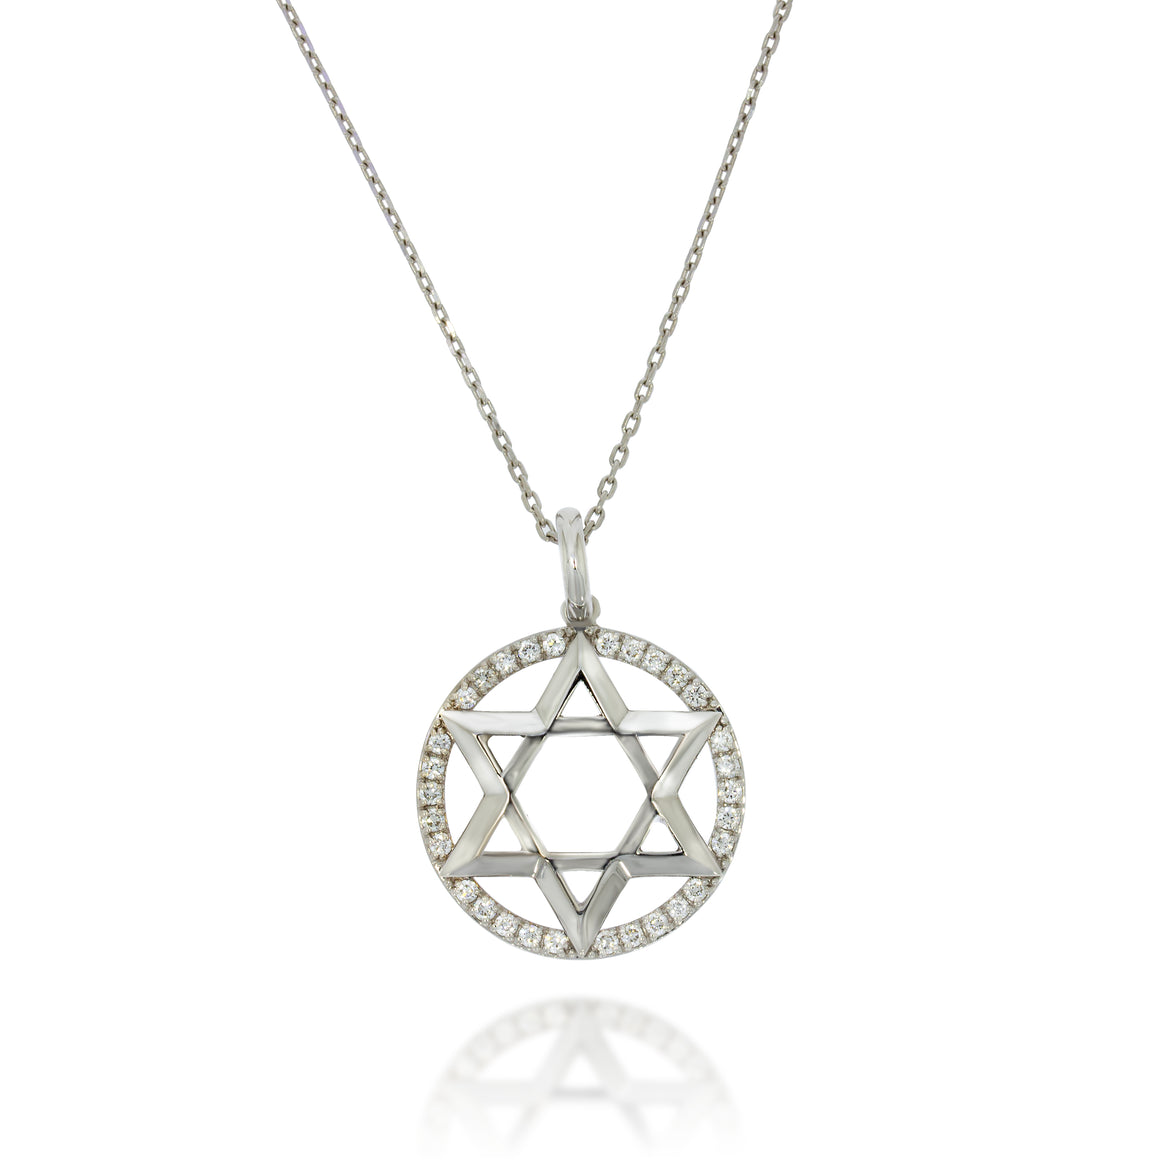 A 3D Star of David pendant, 18k white gold, thick circle halo with 30 Dazzling Brilliance Diamond. extraordinary piece of jewelry.